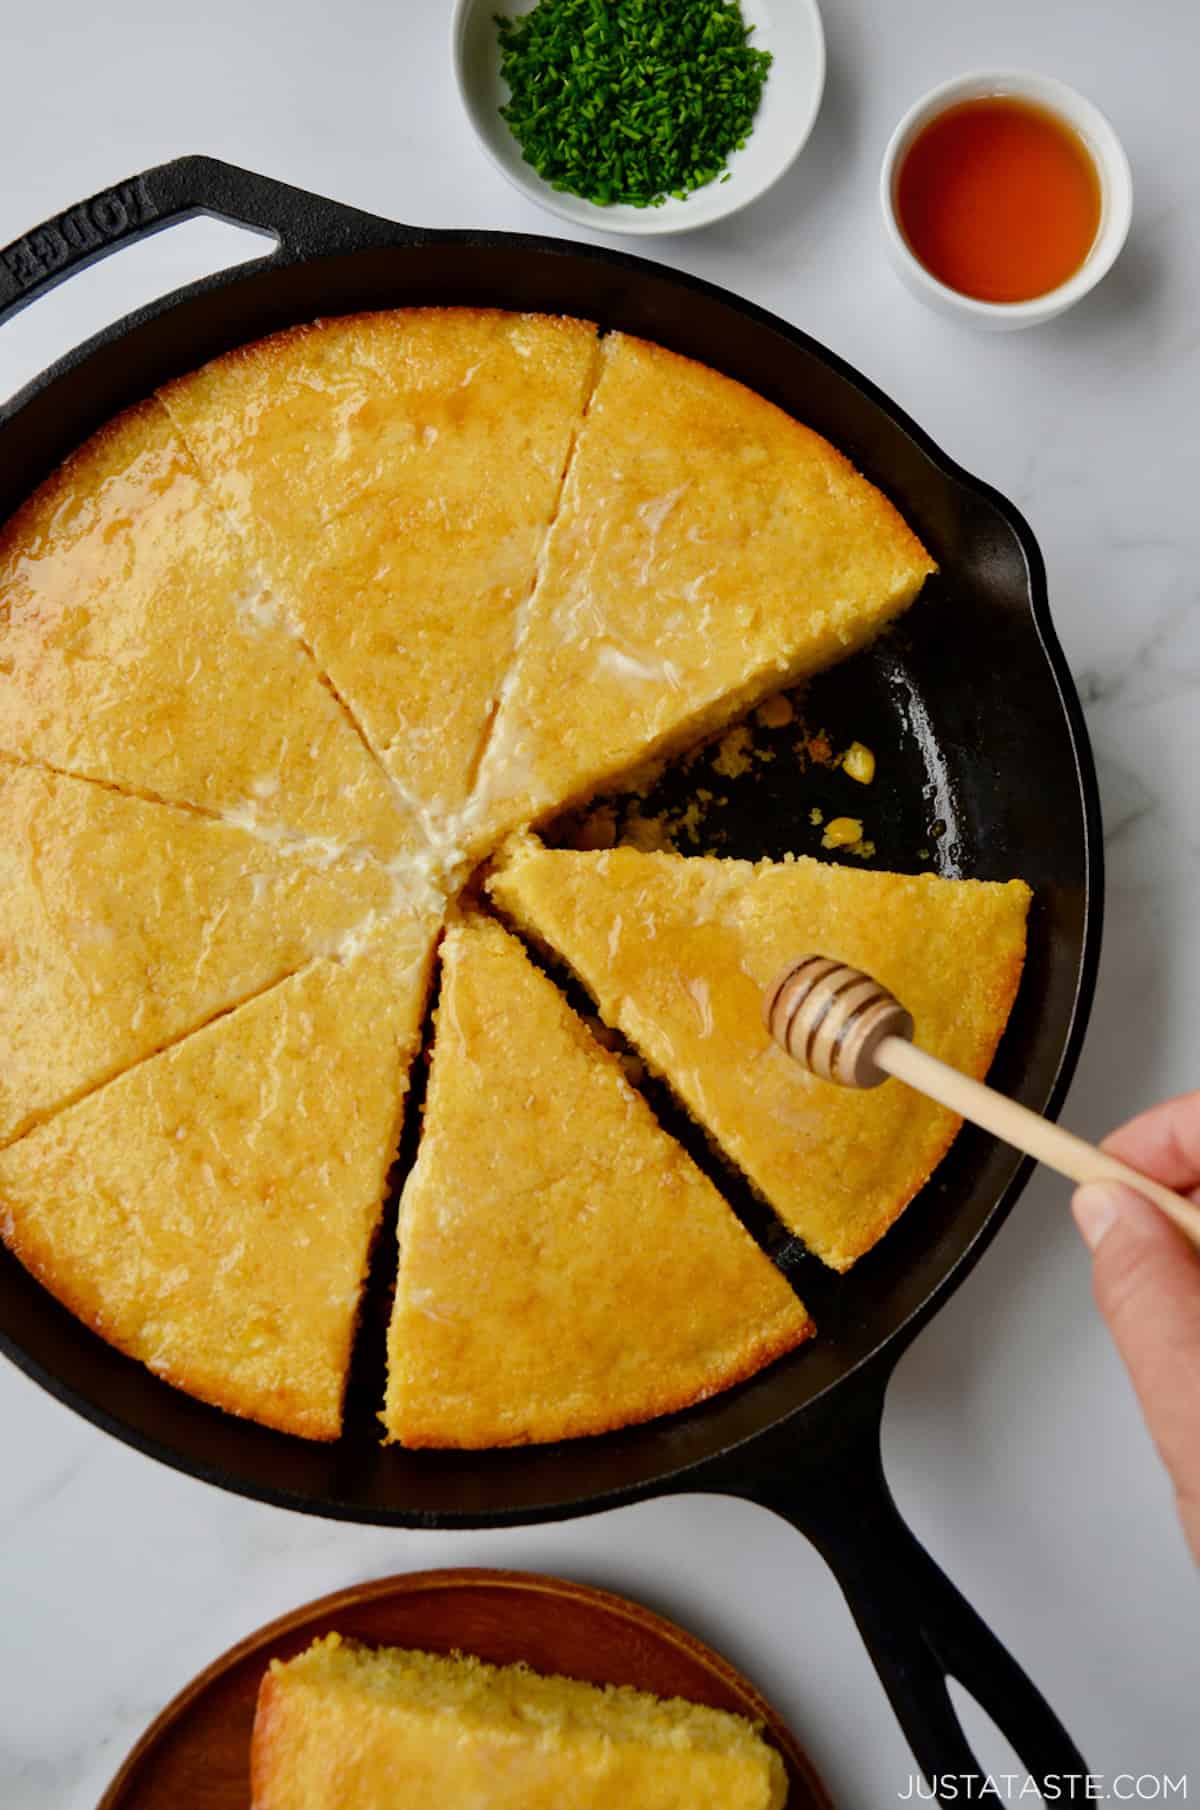 A person drizzling honey over a sliced cornbread in a cast iron pan. Surrounding the pan is a plate with a slice of cornbread on it, a small bowl with minced chives and a small bowl of honey.